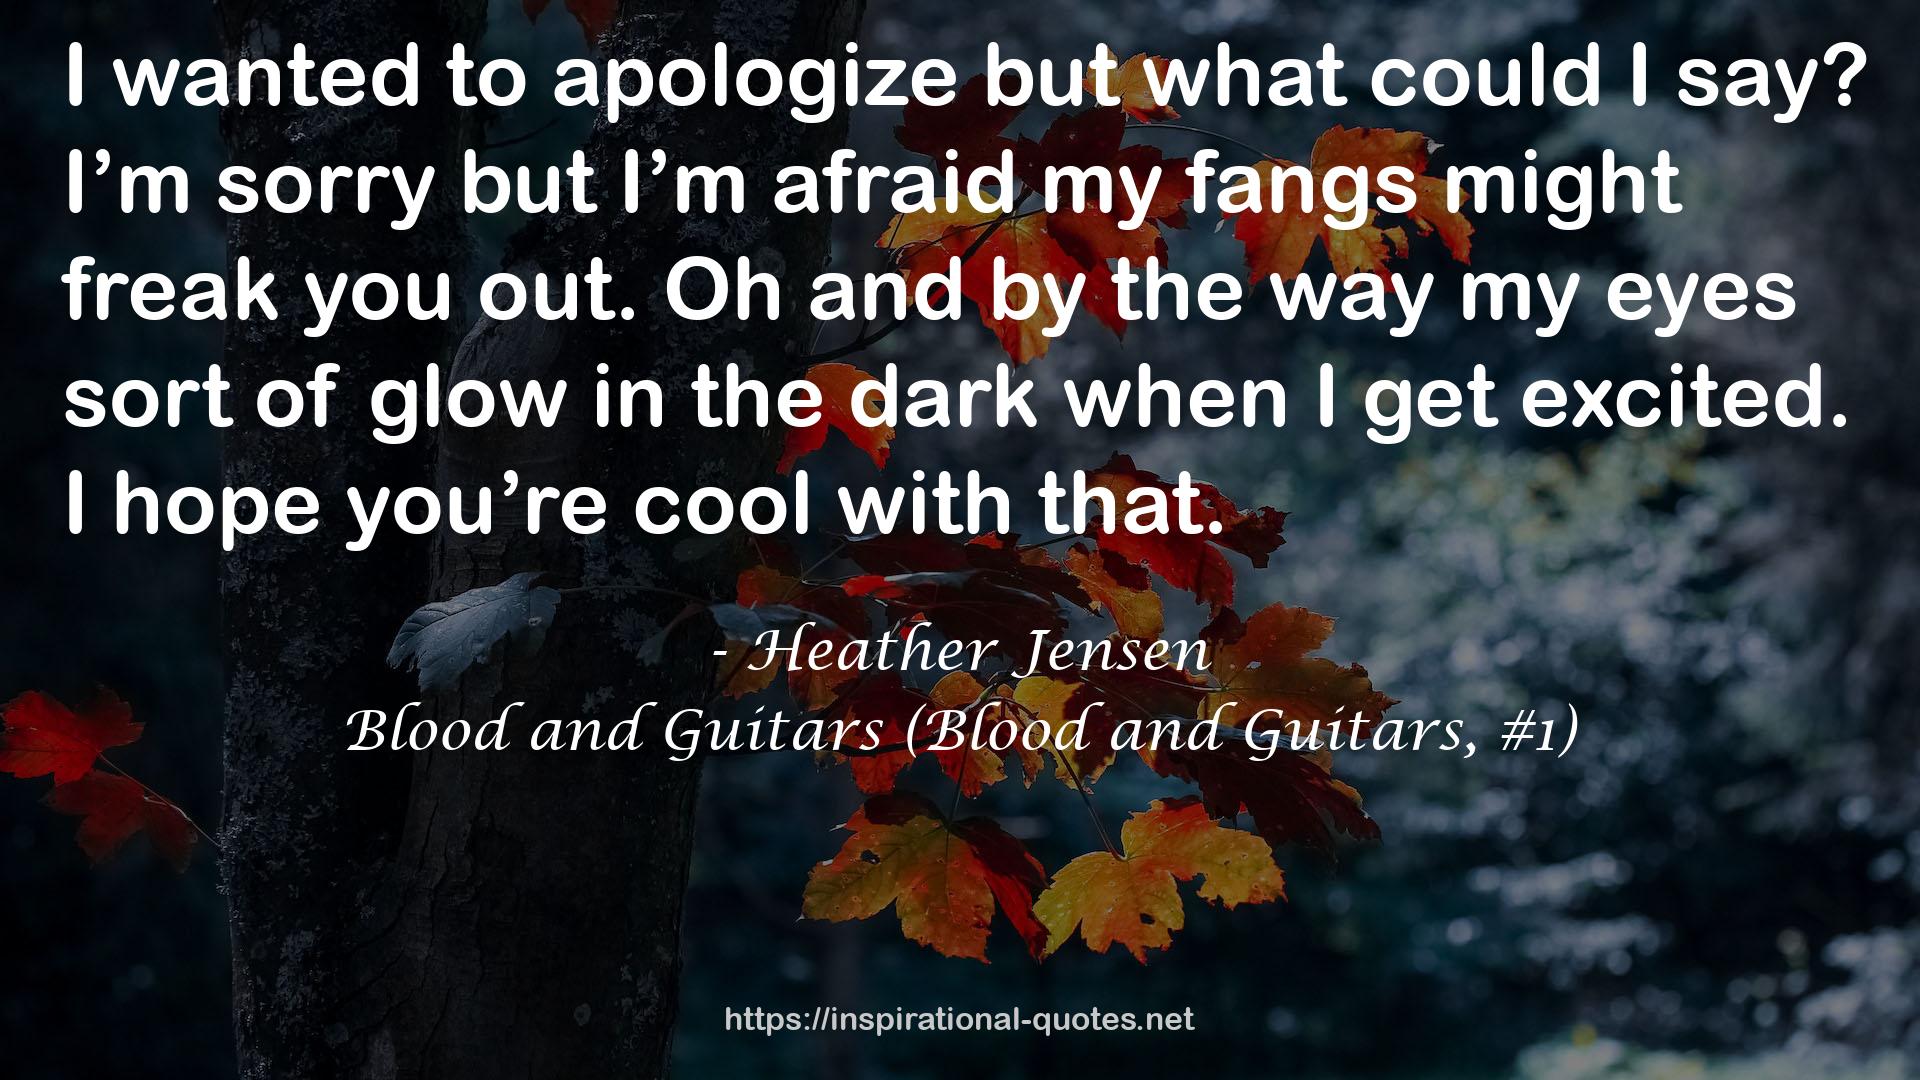 Blood and Guitars (Blood and Guitars, #1) QUOTES